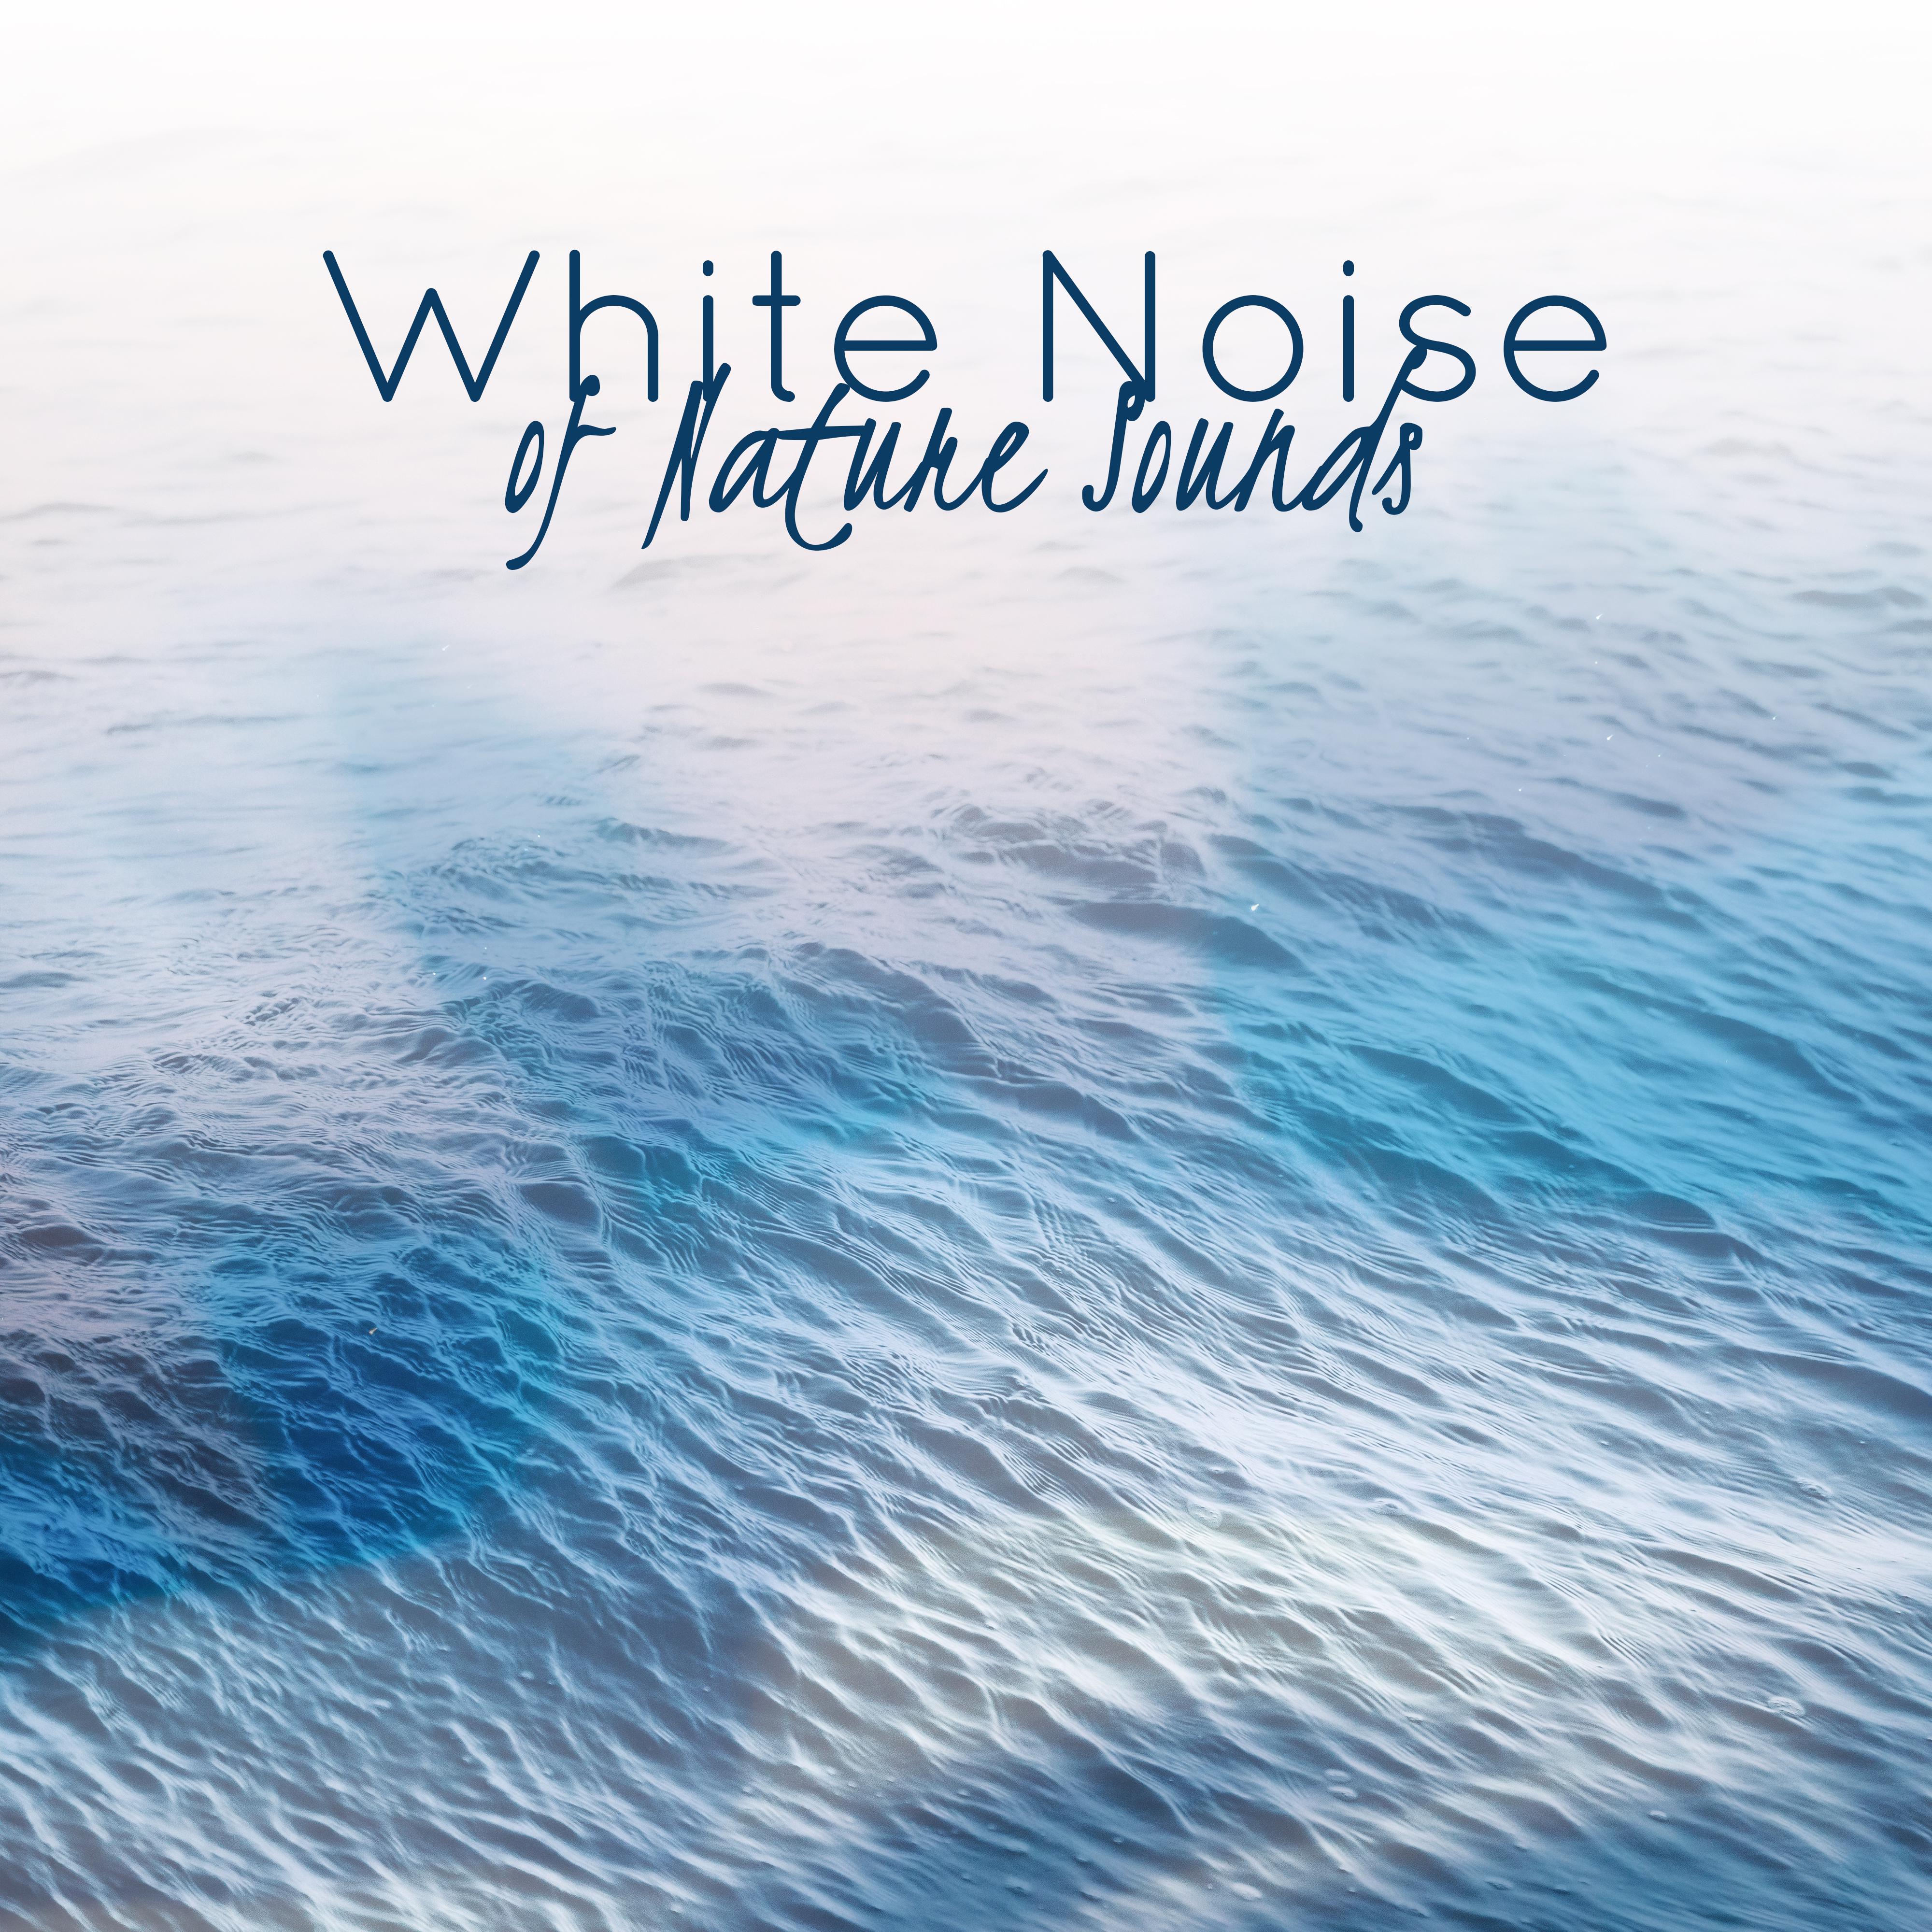 White Noise of Nature Sounds